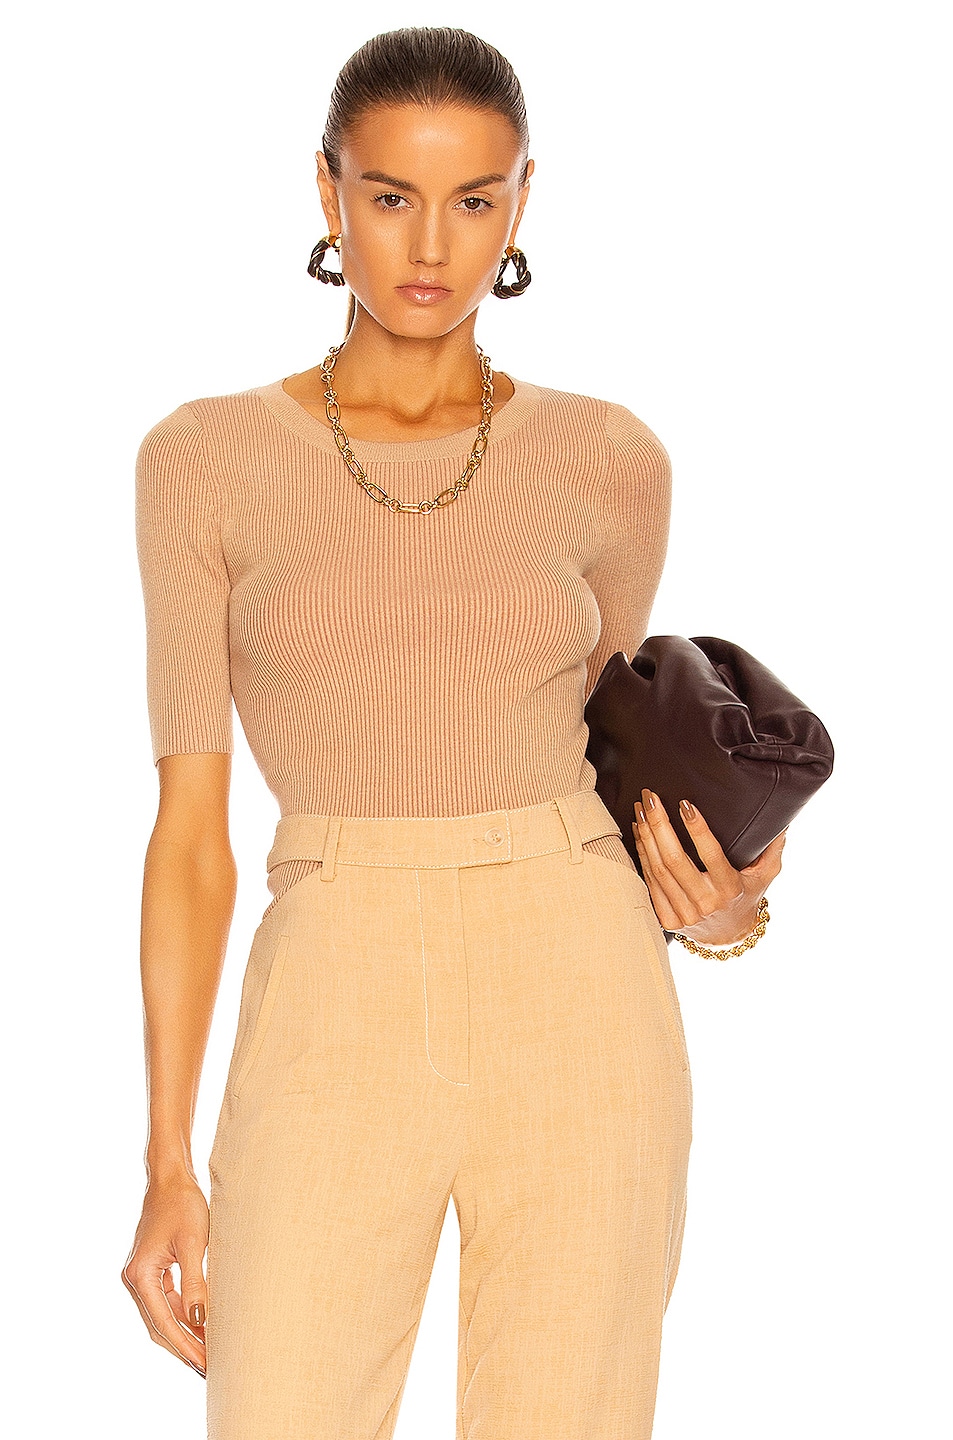 Image 1 of L'AGENCE Alessi Pullover Short Sleeve Top in Tan & Dark Tan